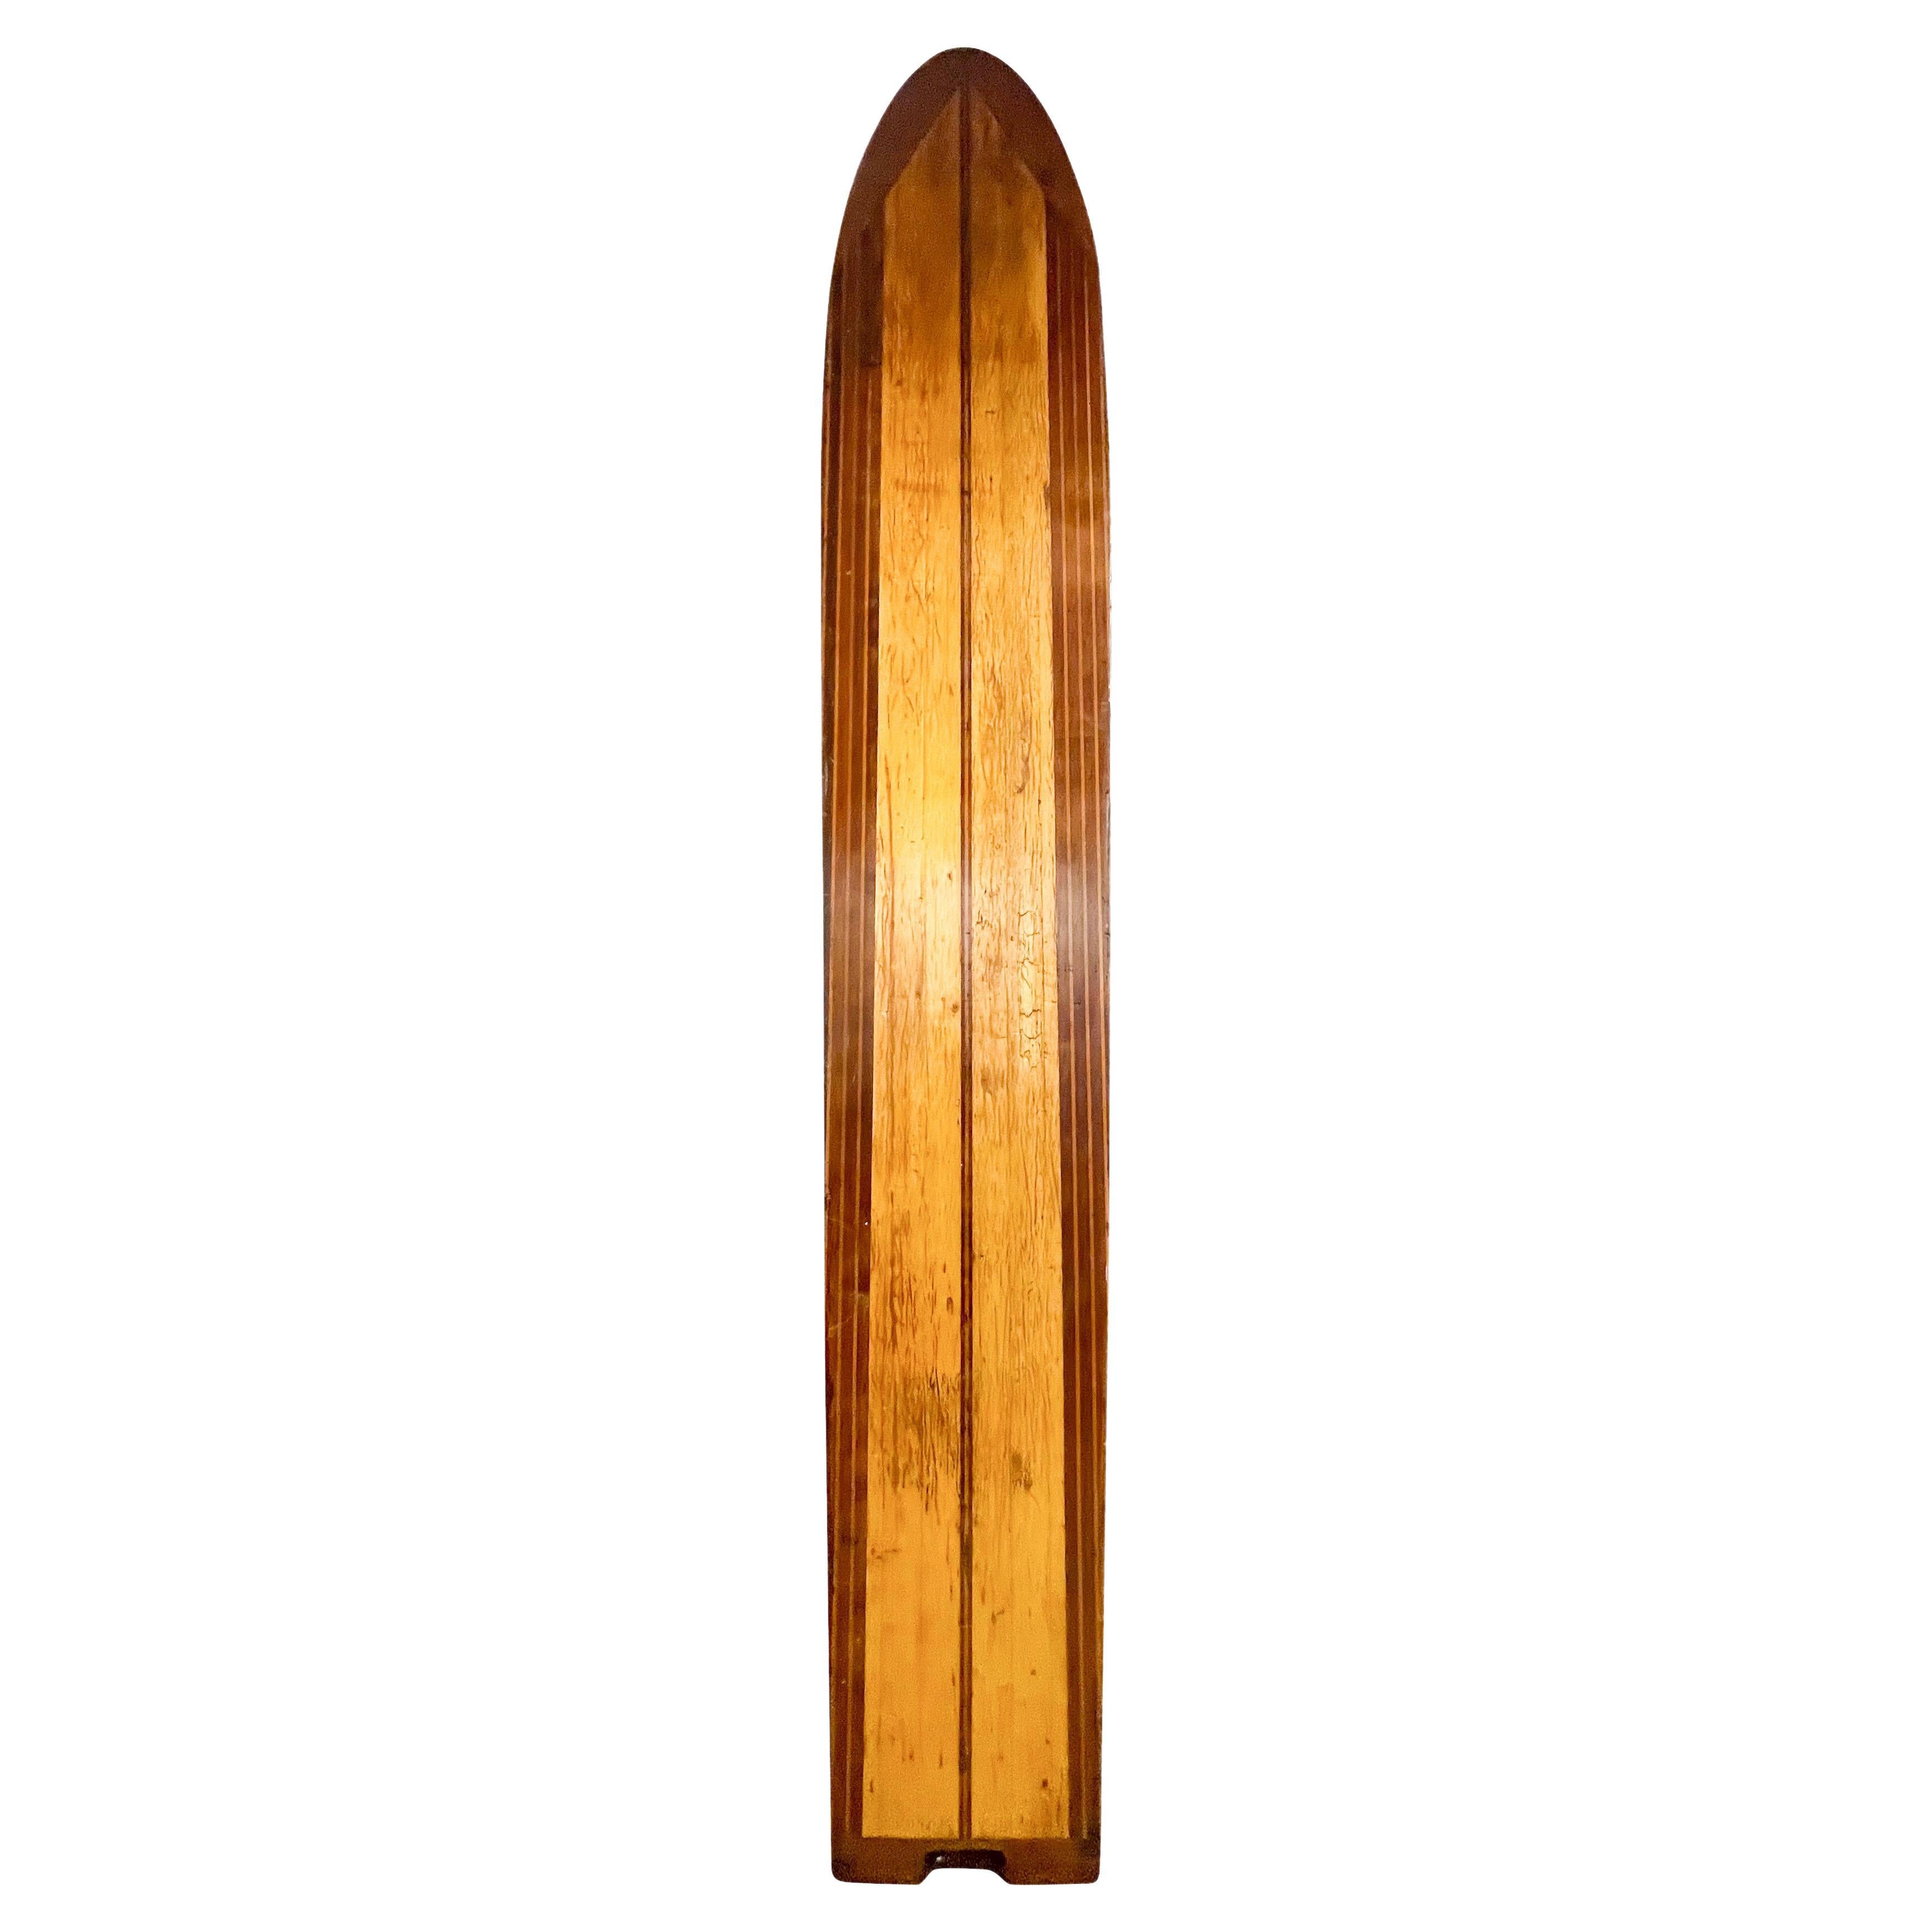 1930s Pacific System Homes Wooden Surfboard For Sale